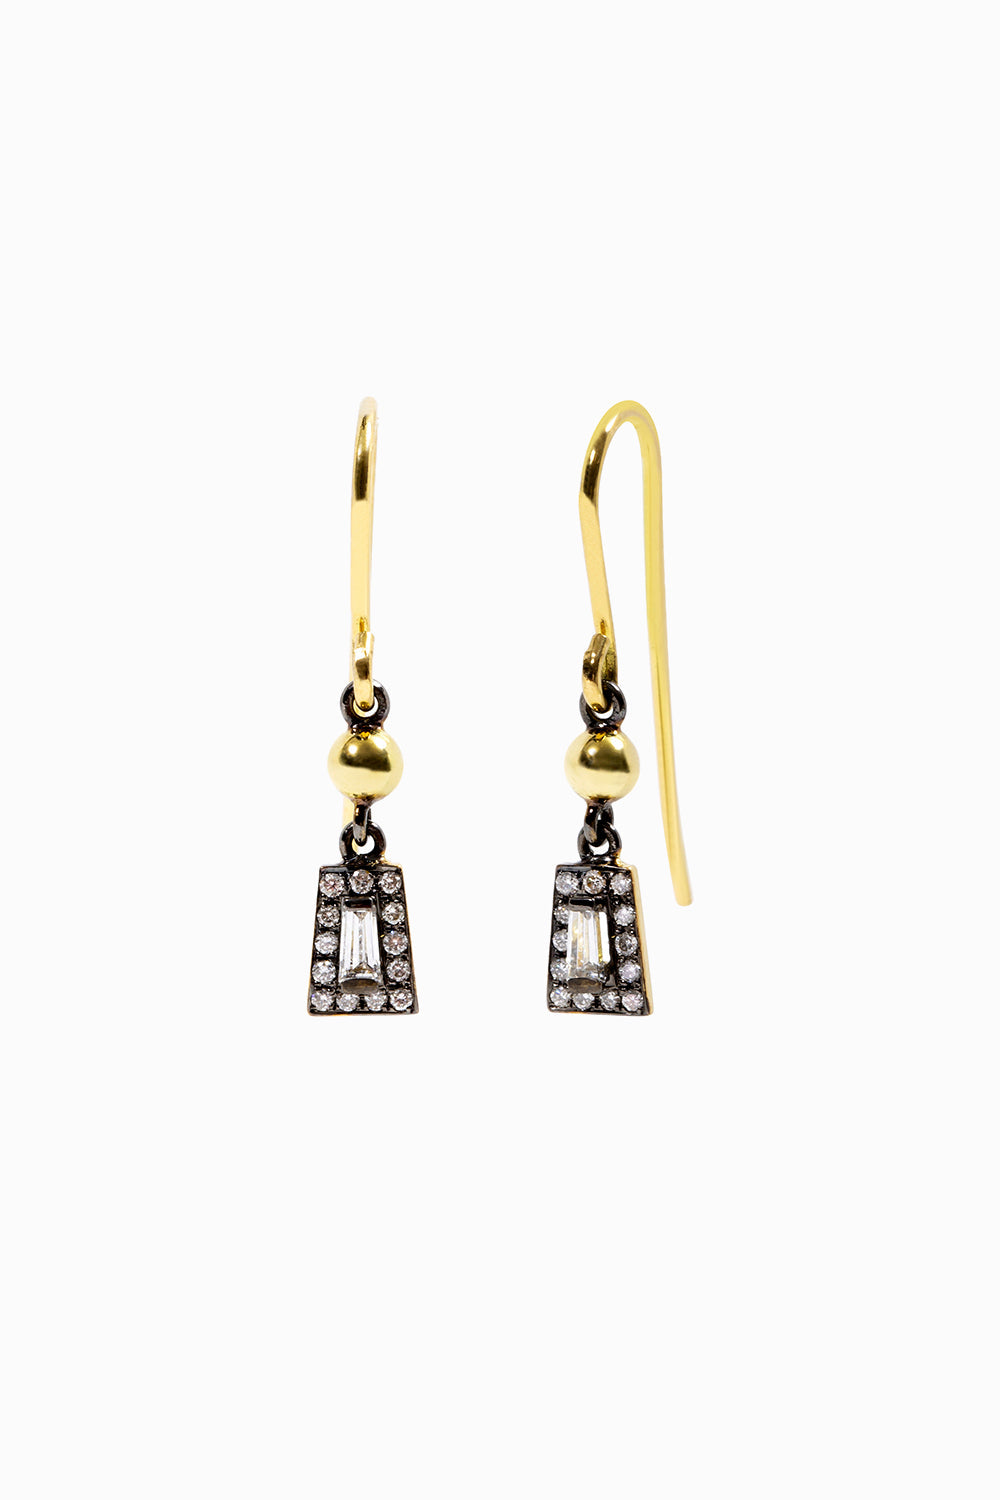 Taper earrings with gold ball and black rhodium